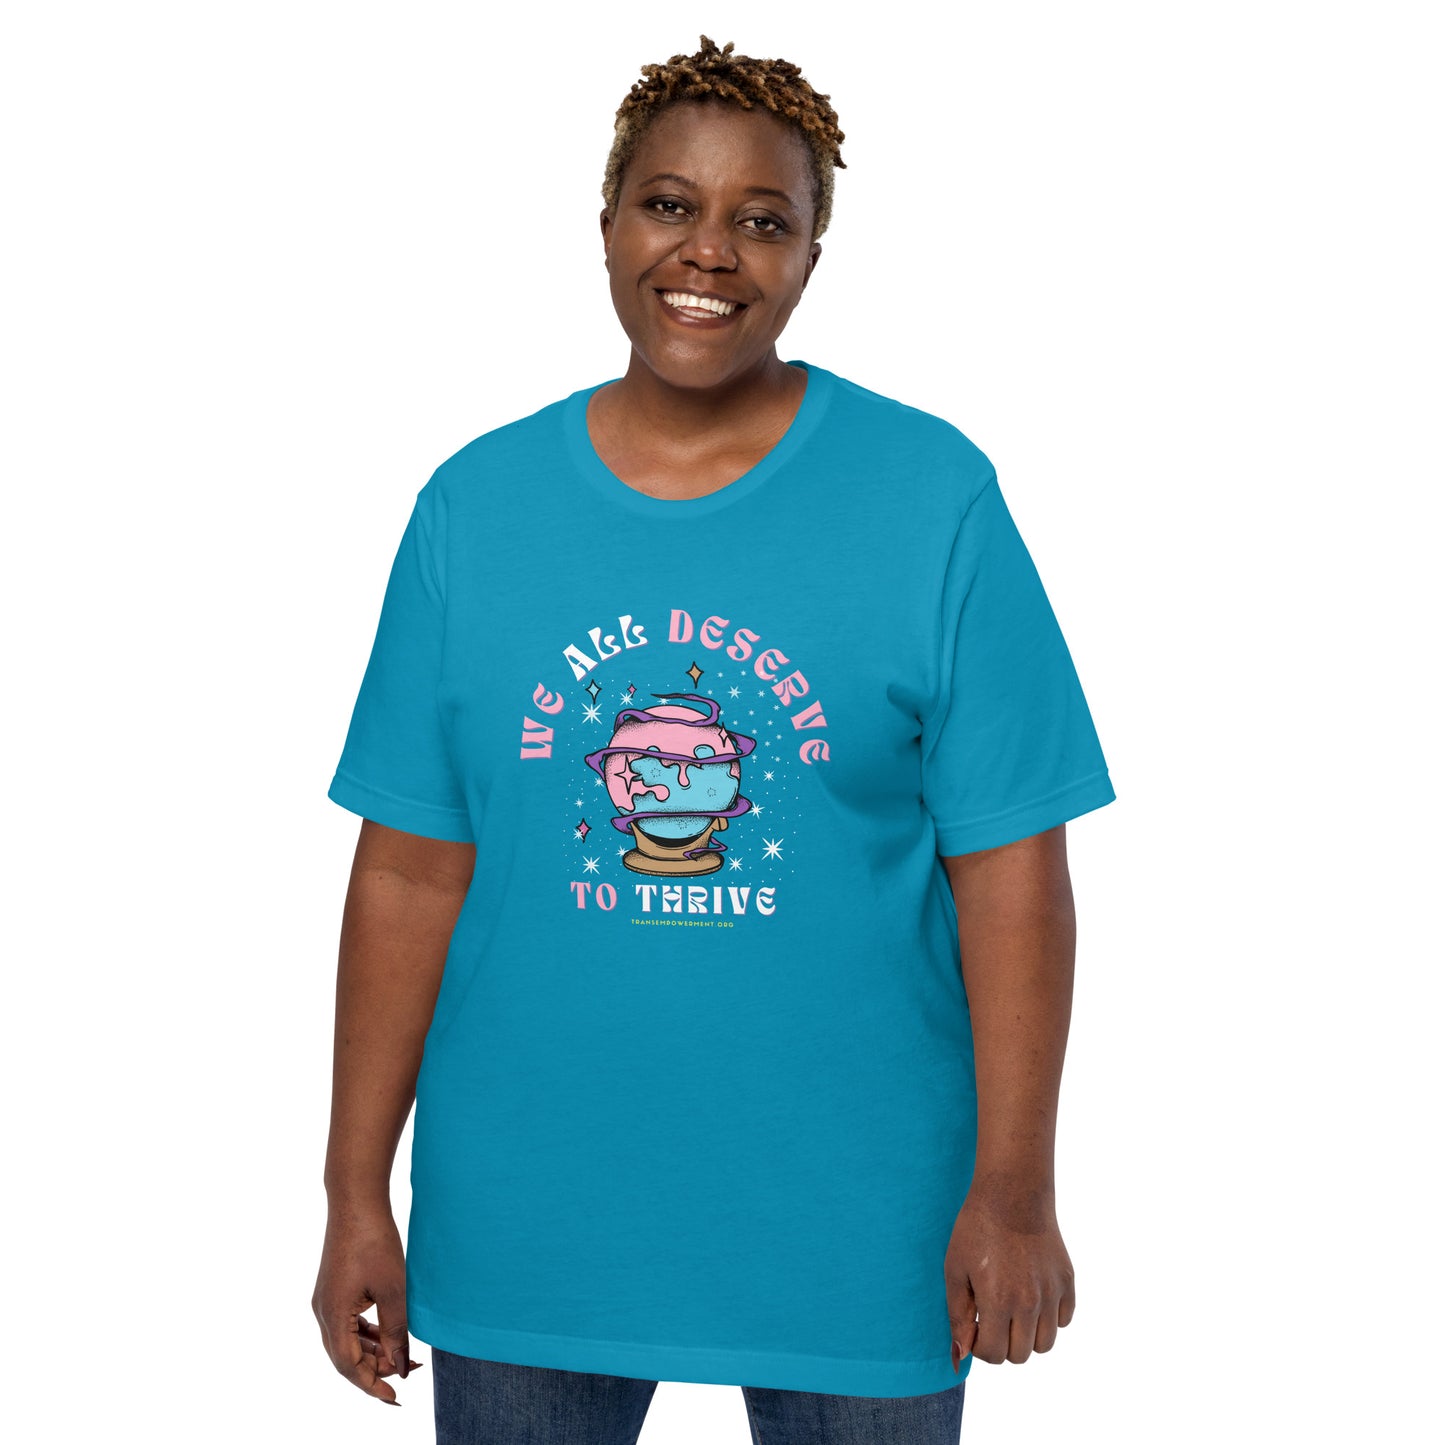 Unisex "We All Deserve to Thrive" t-shirt